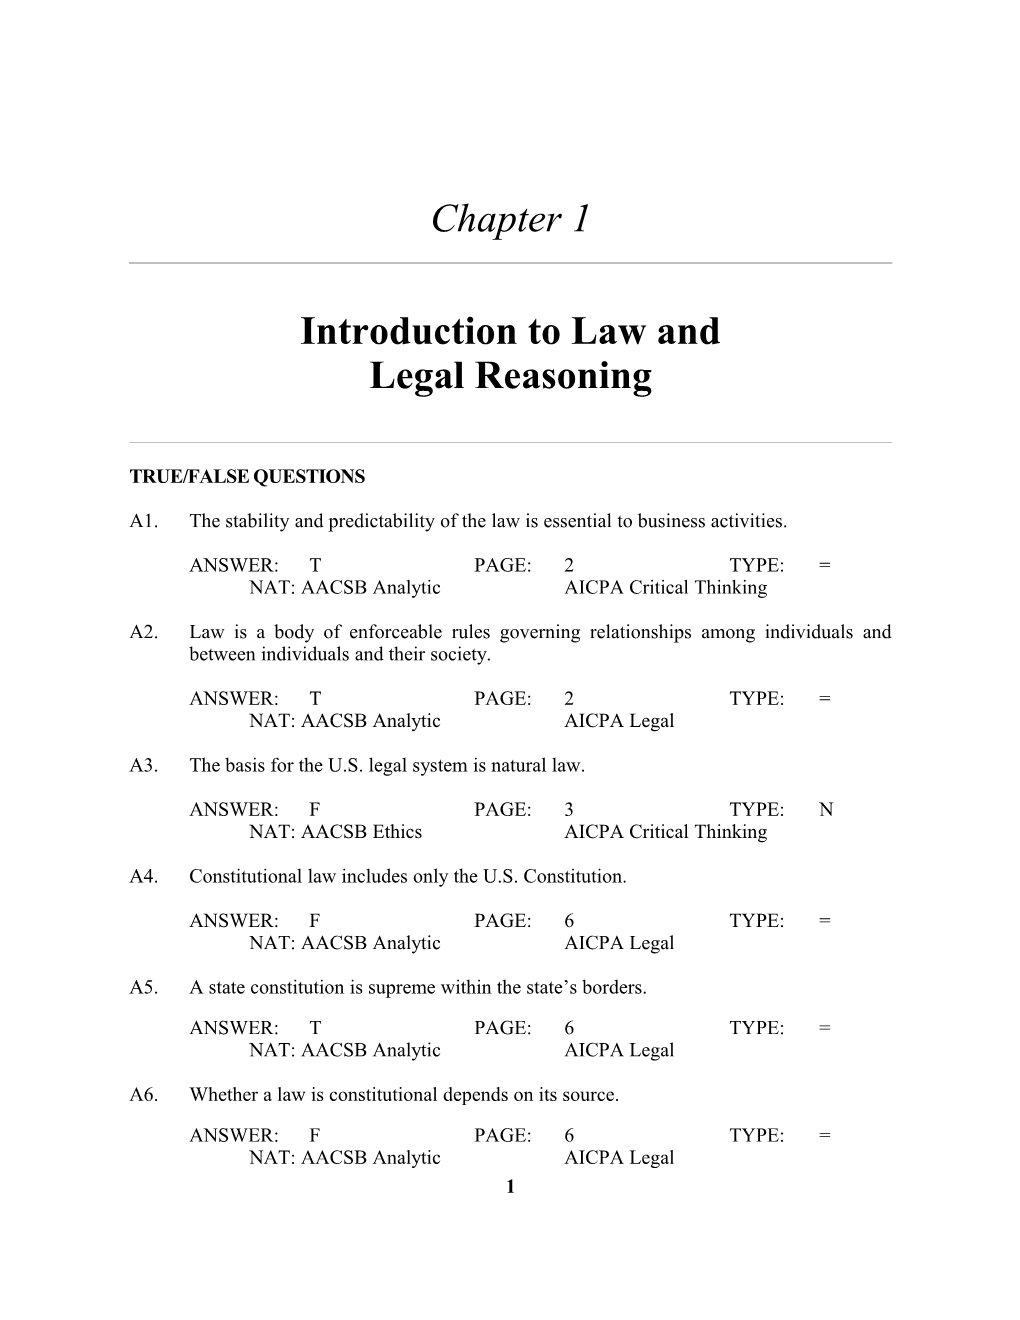 Chapter 1: Introduction to Law and Legal Reasoning 1